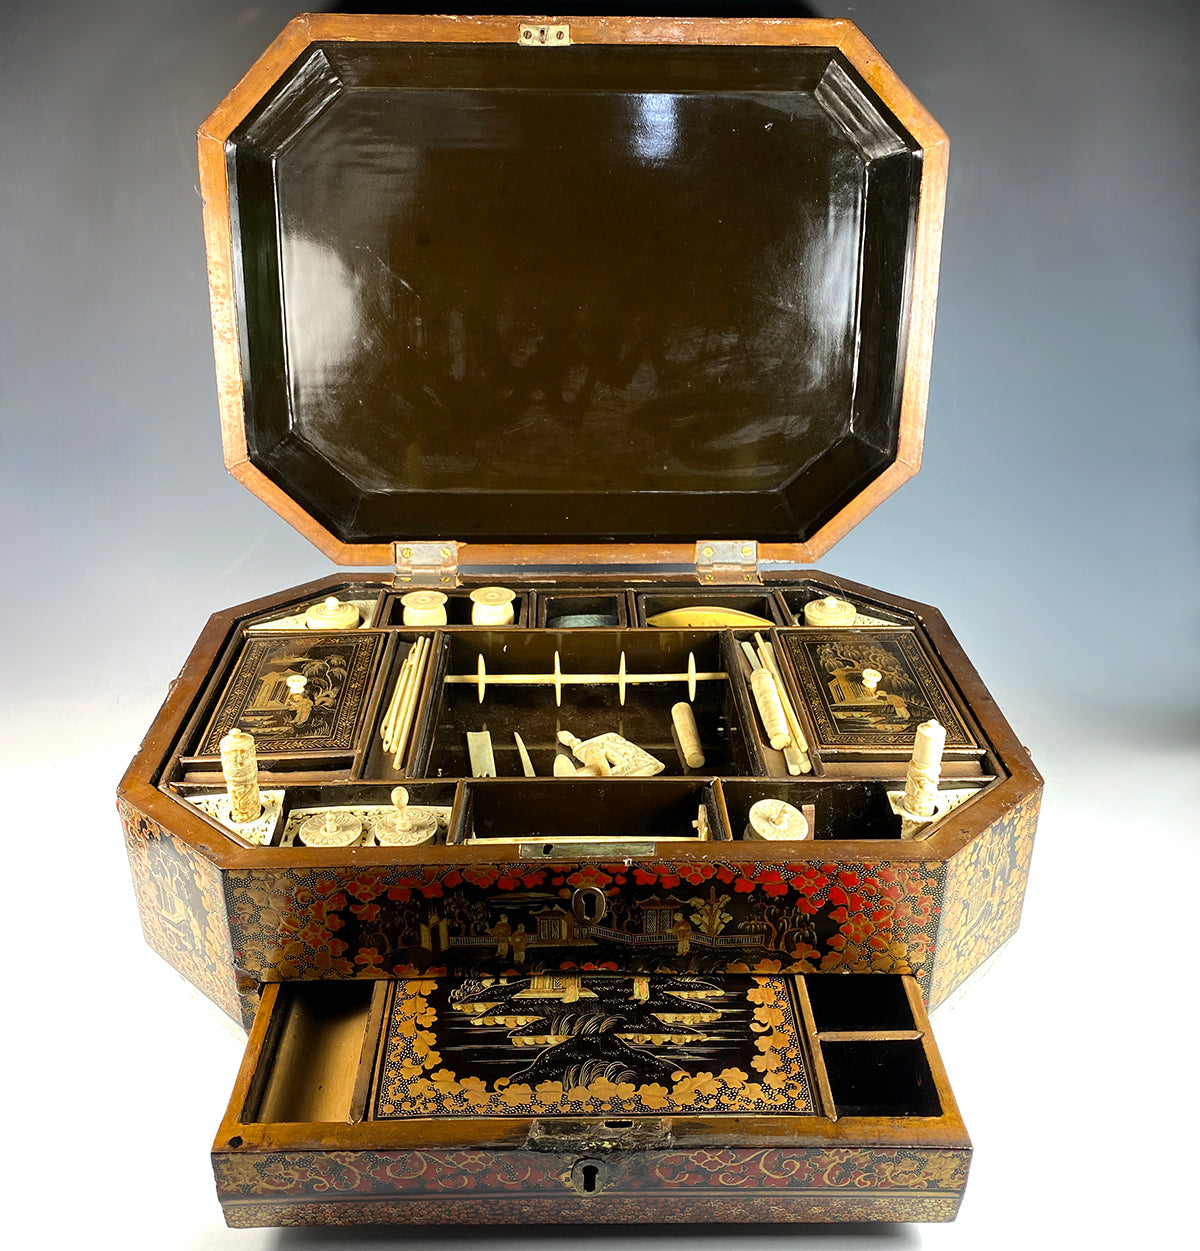 Fine Antique Chinese Lacquer 14.25" Sewing Box, Tools, Writer's Slop Desk Drawer - Victorian Era Asian Compendium